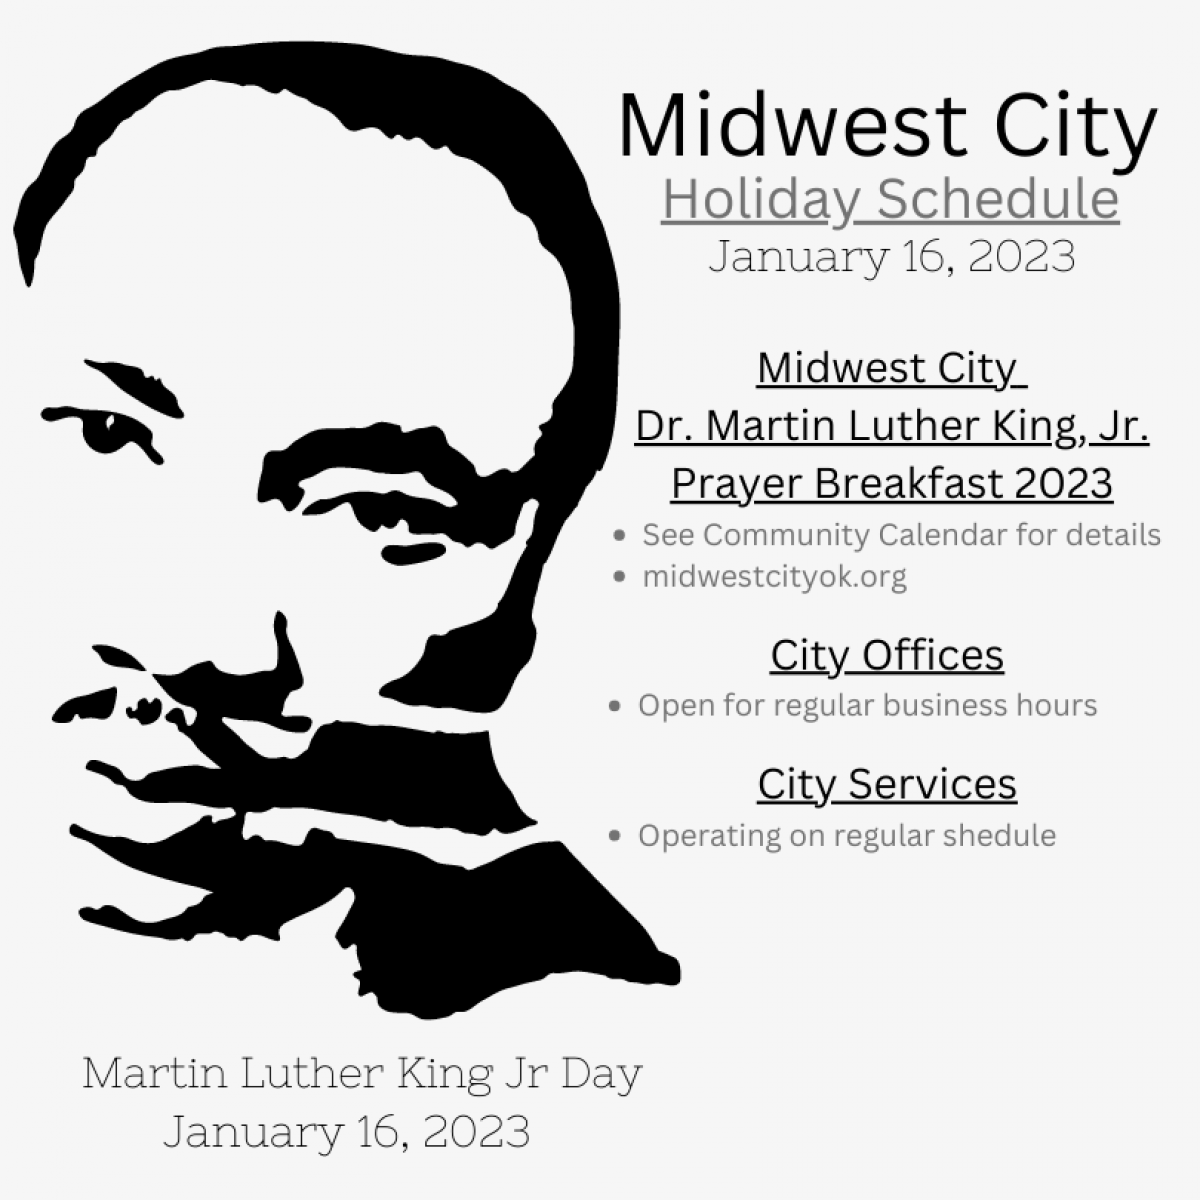 Holiday Schedule - Martin Luther King Jr Day 2023 | Midwest City Oklahoma